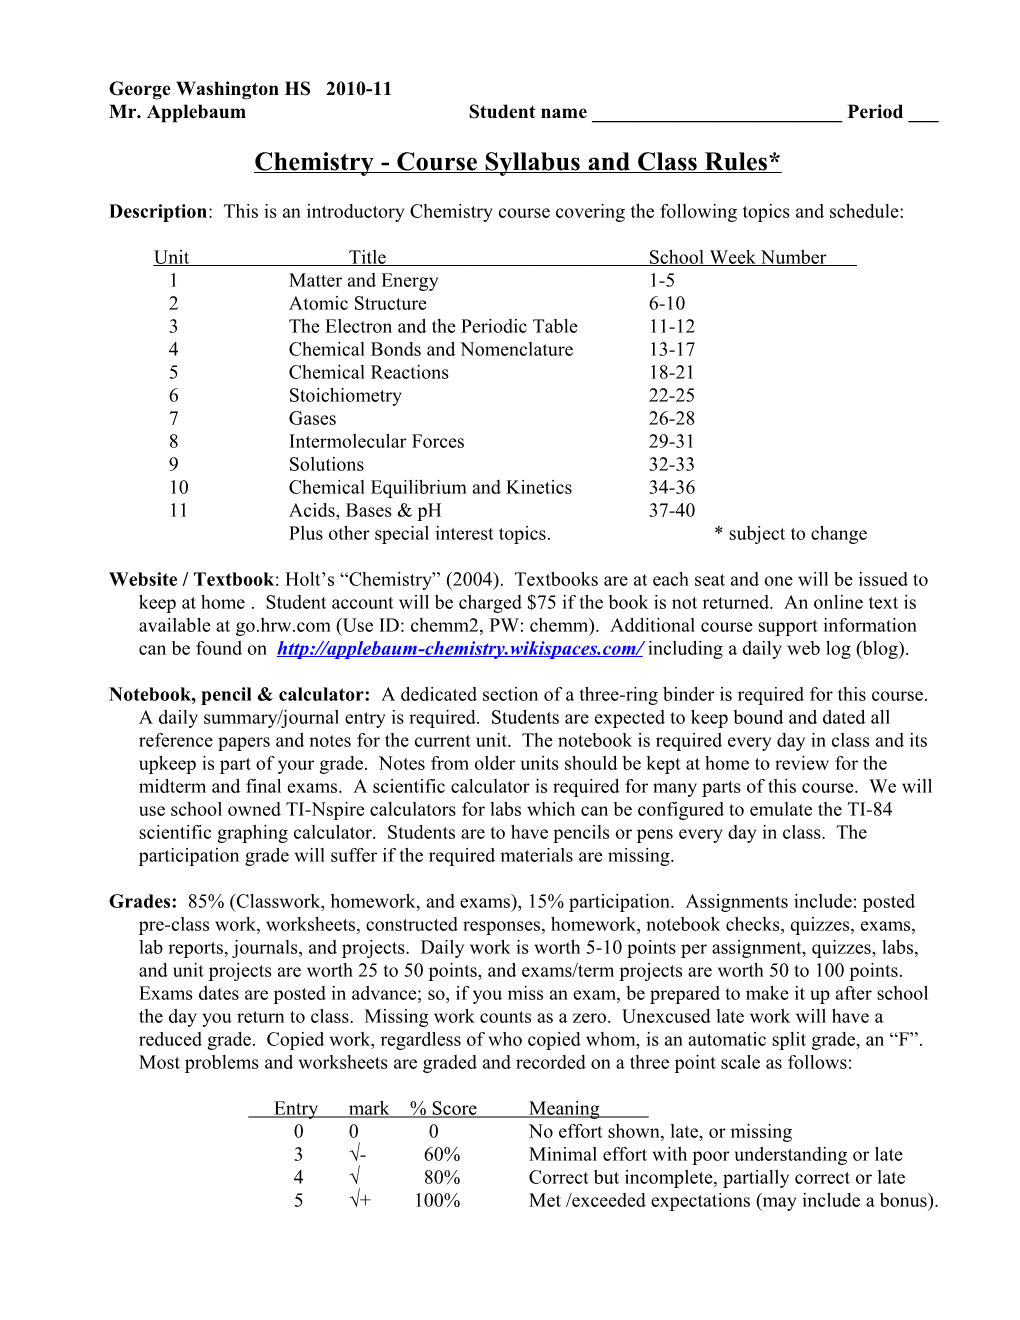 Chemistry 2004-2005, Syllabus and Classroom Rules